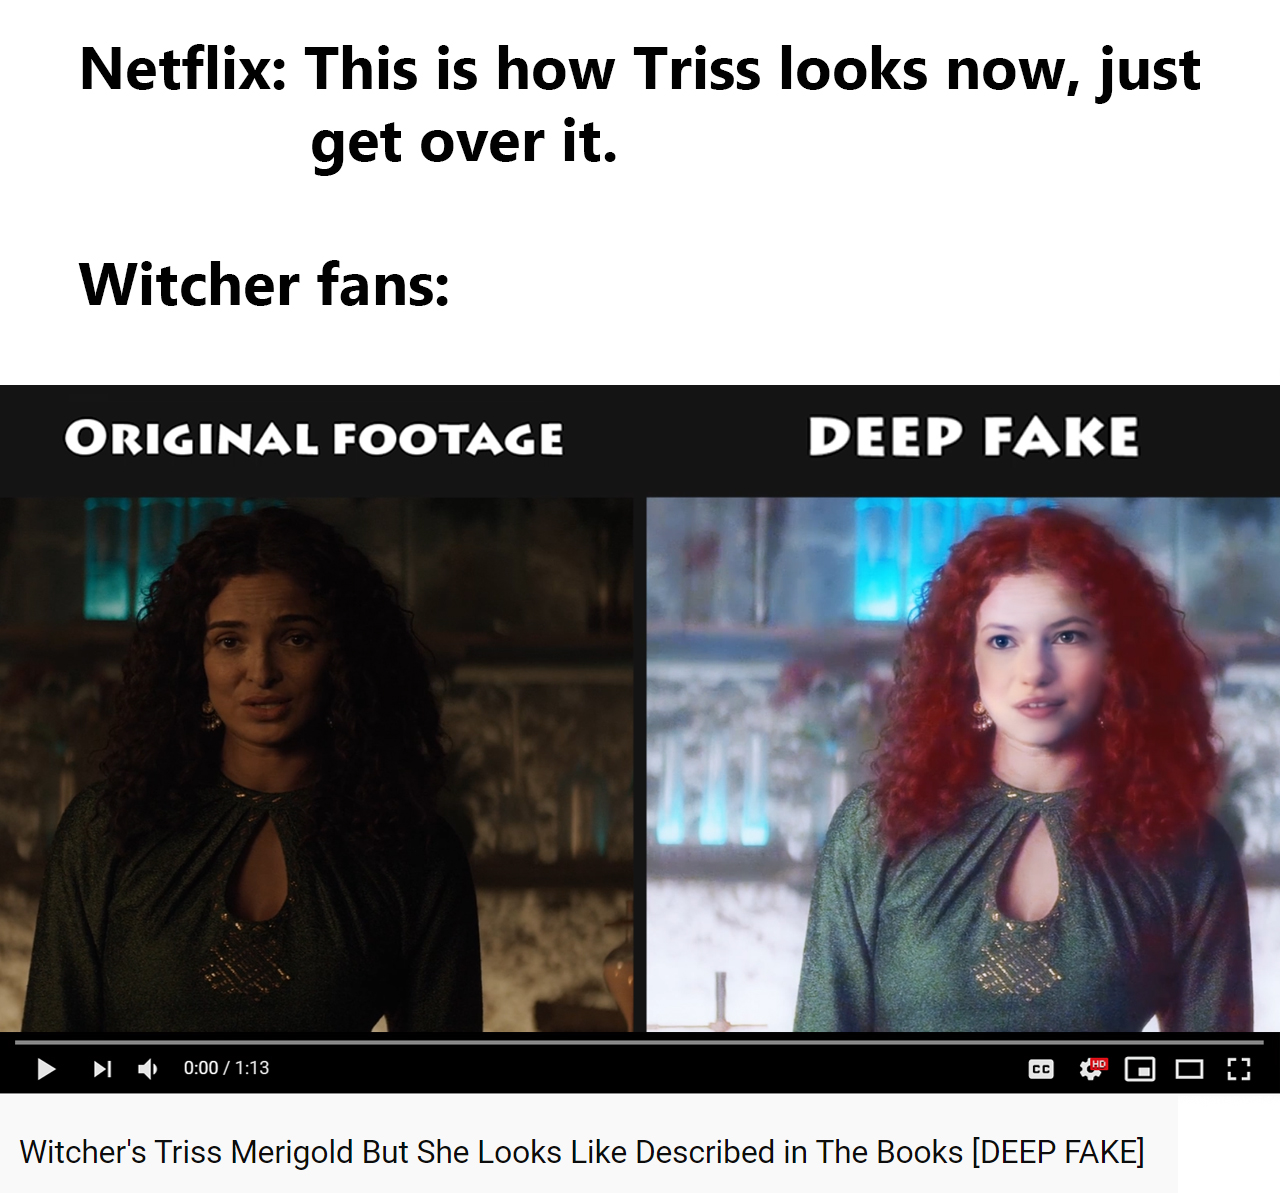 Witcher memes - photo caption - Netflix This is how Triss looks now, just get over it. Witcher fans Original Footage Deep Fake Witcher's Triss Merigold But She Looks Described in The Books Deep Fake